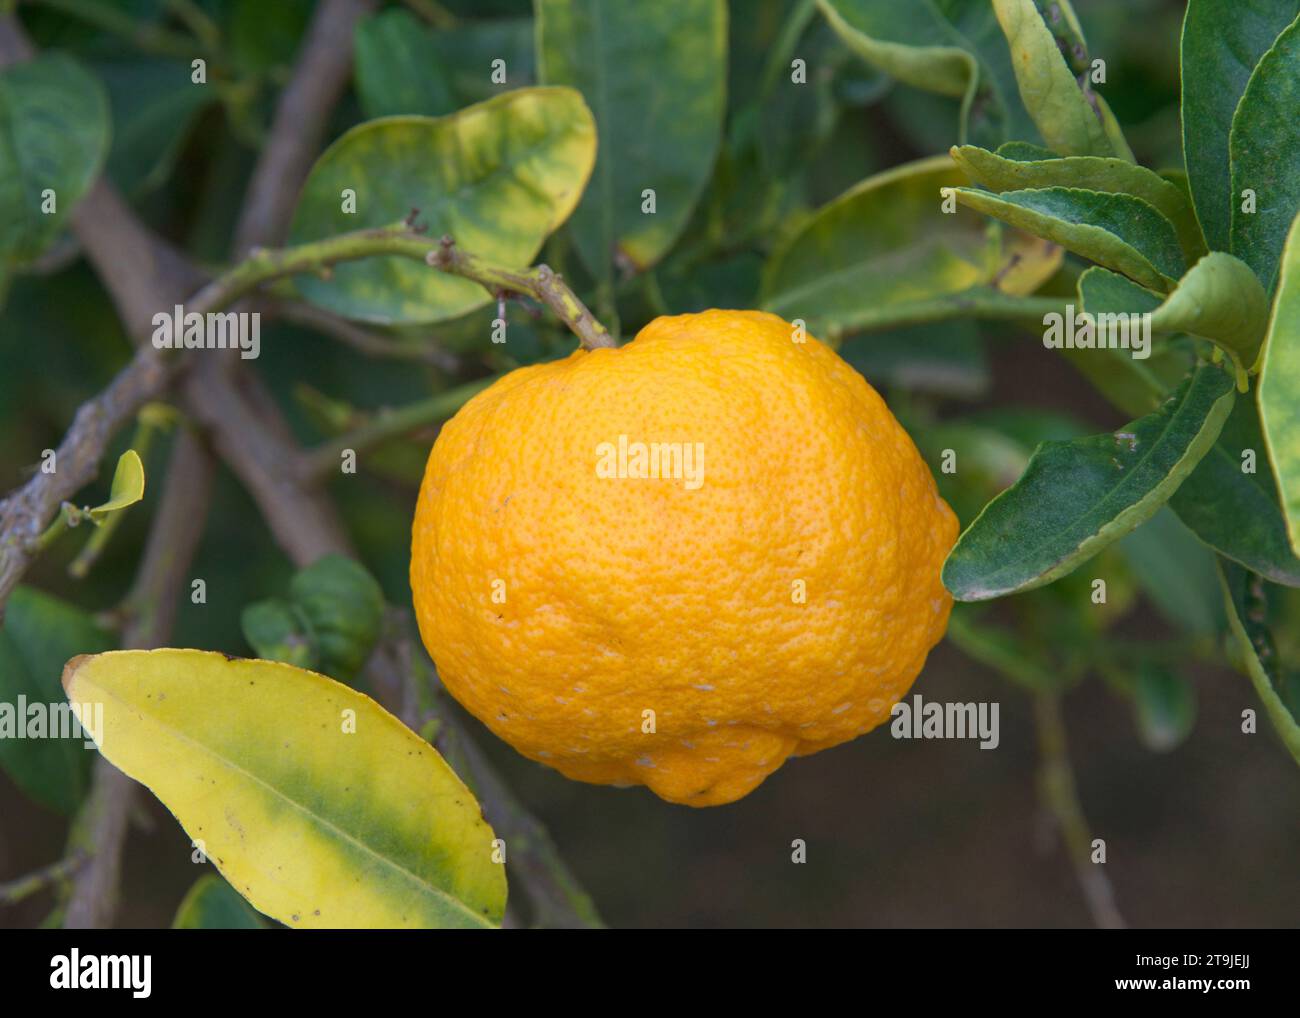 Citrange Trifoliate Hybrid citrus ripening on the tree surrounded by green leaves. Stock Photo